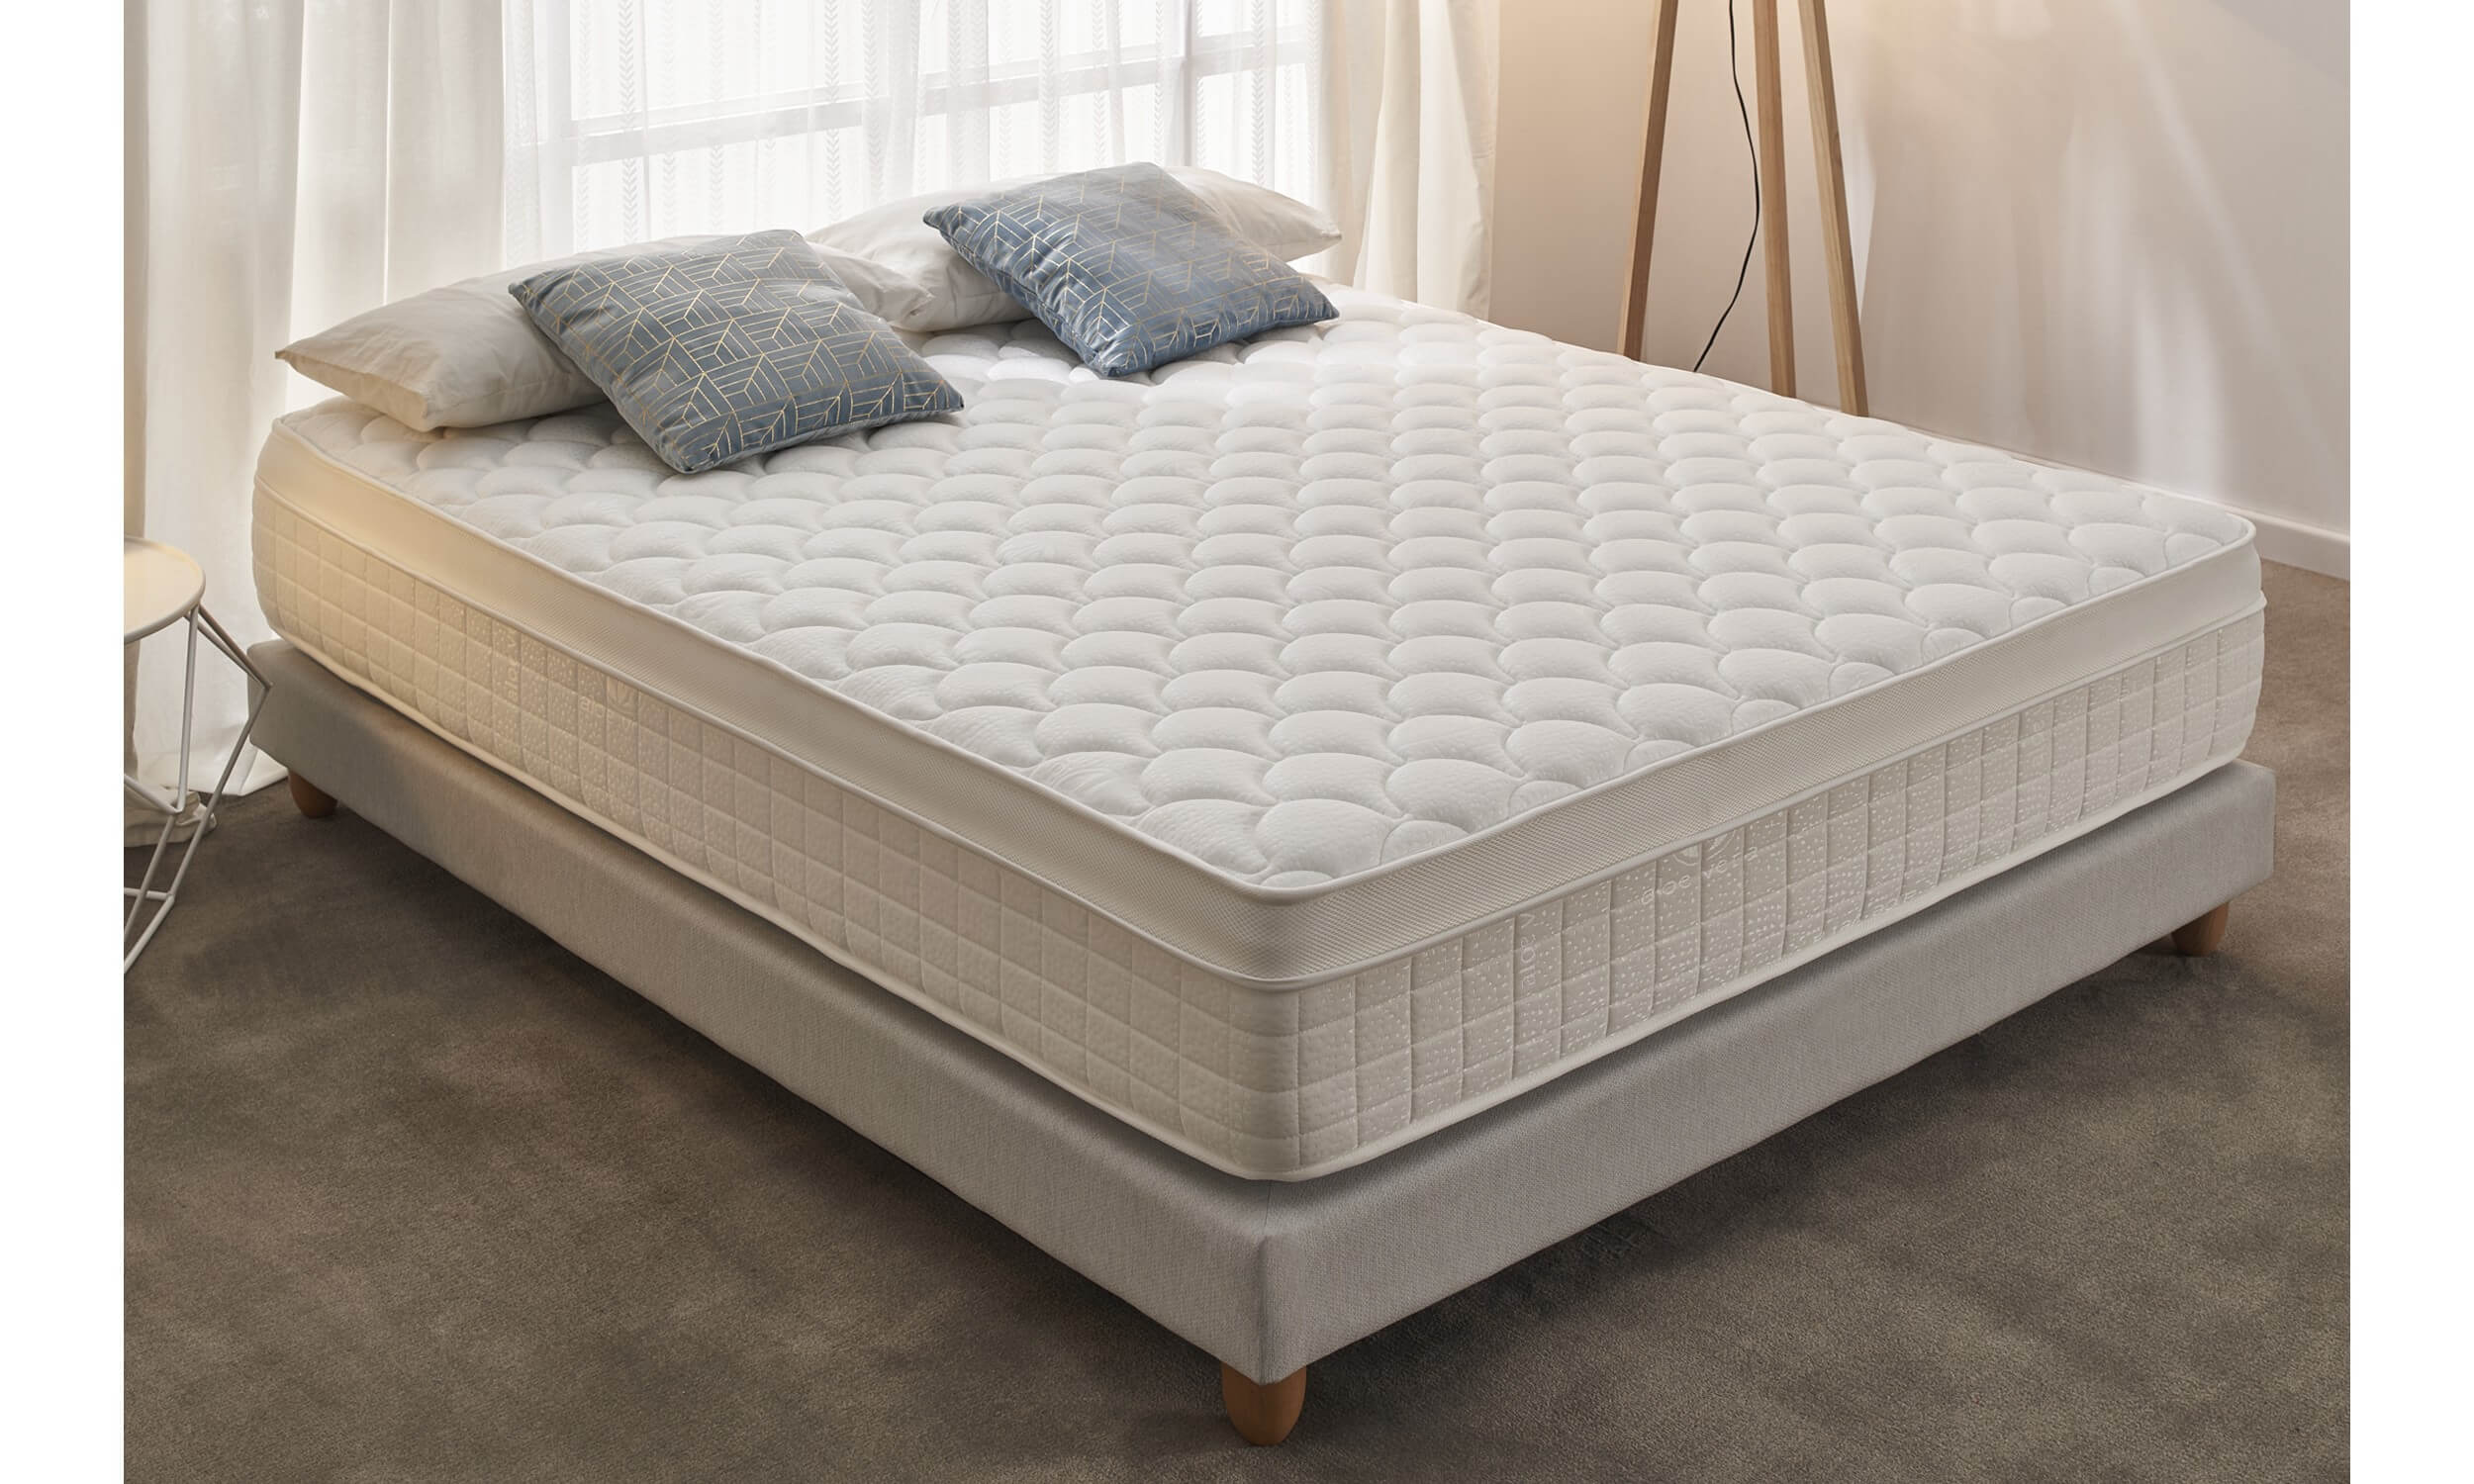 mattress and box spring available